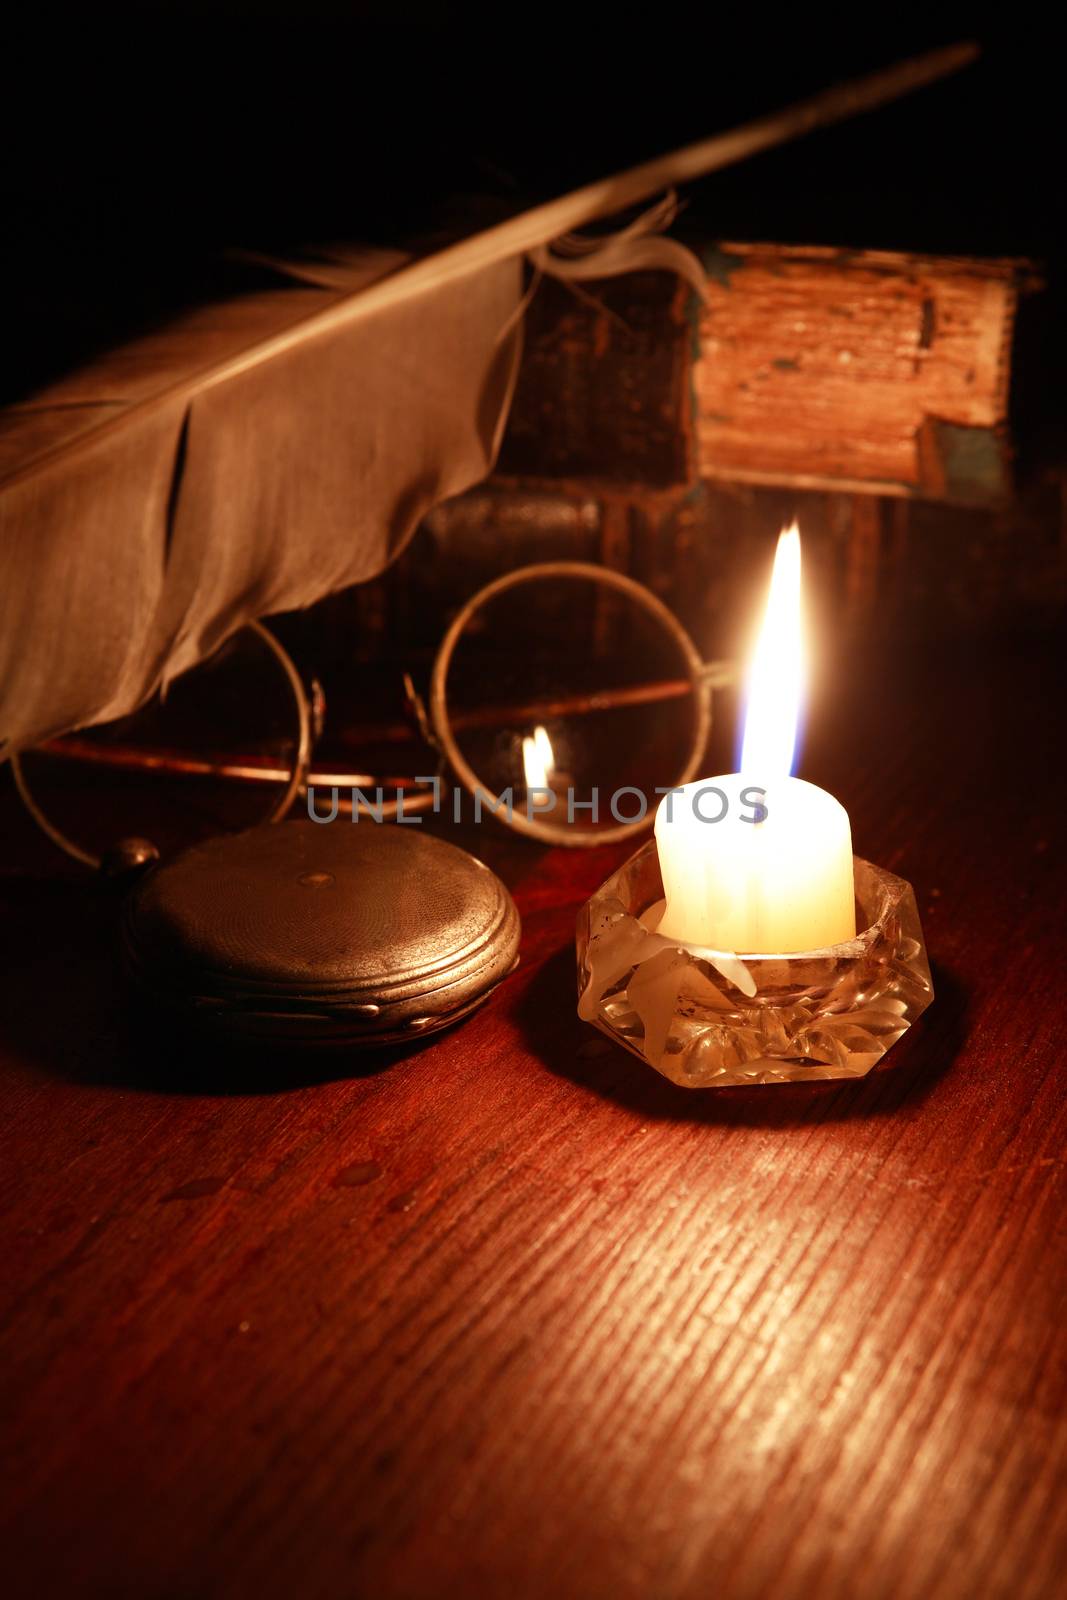 Vintage still life with lighting candle near old things